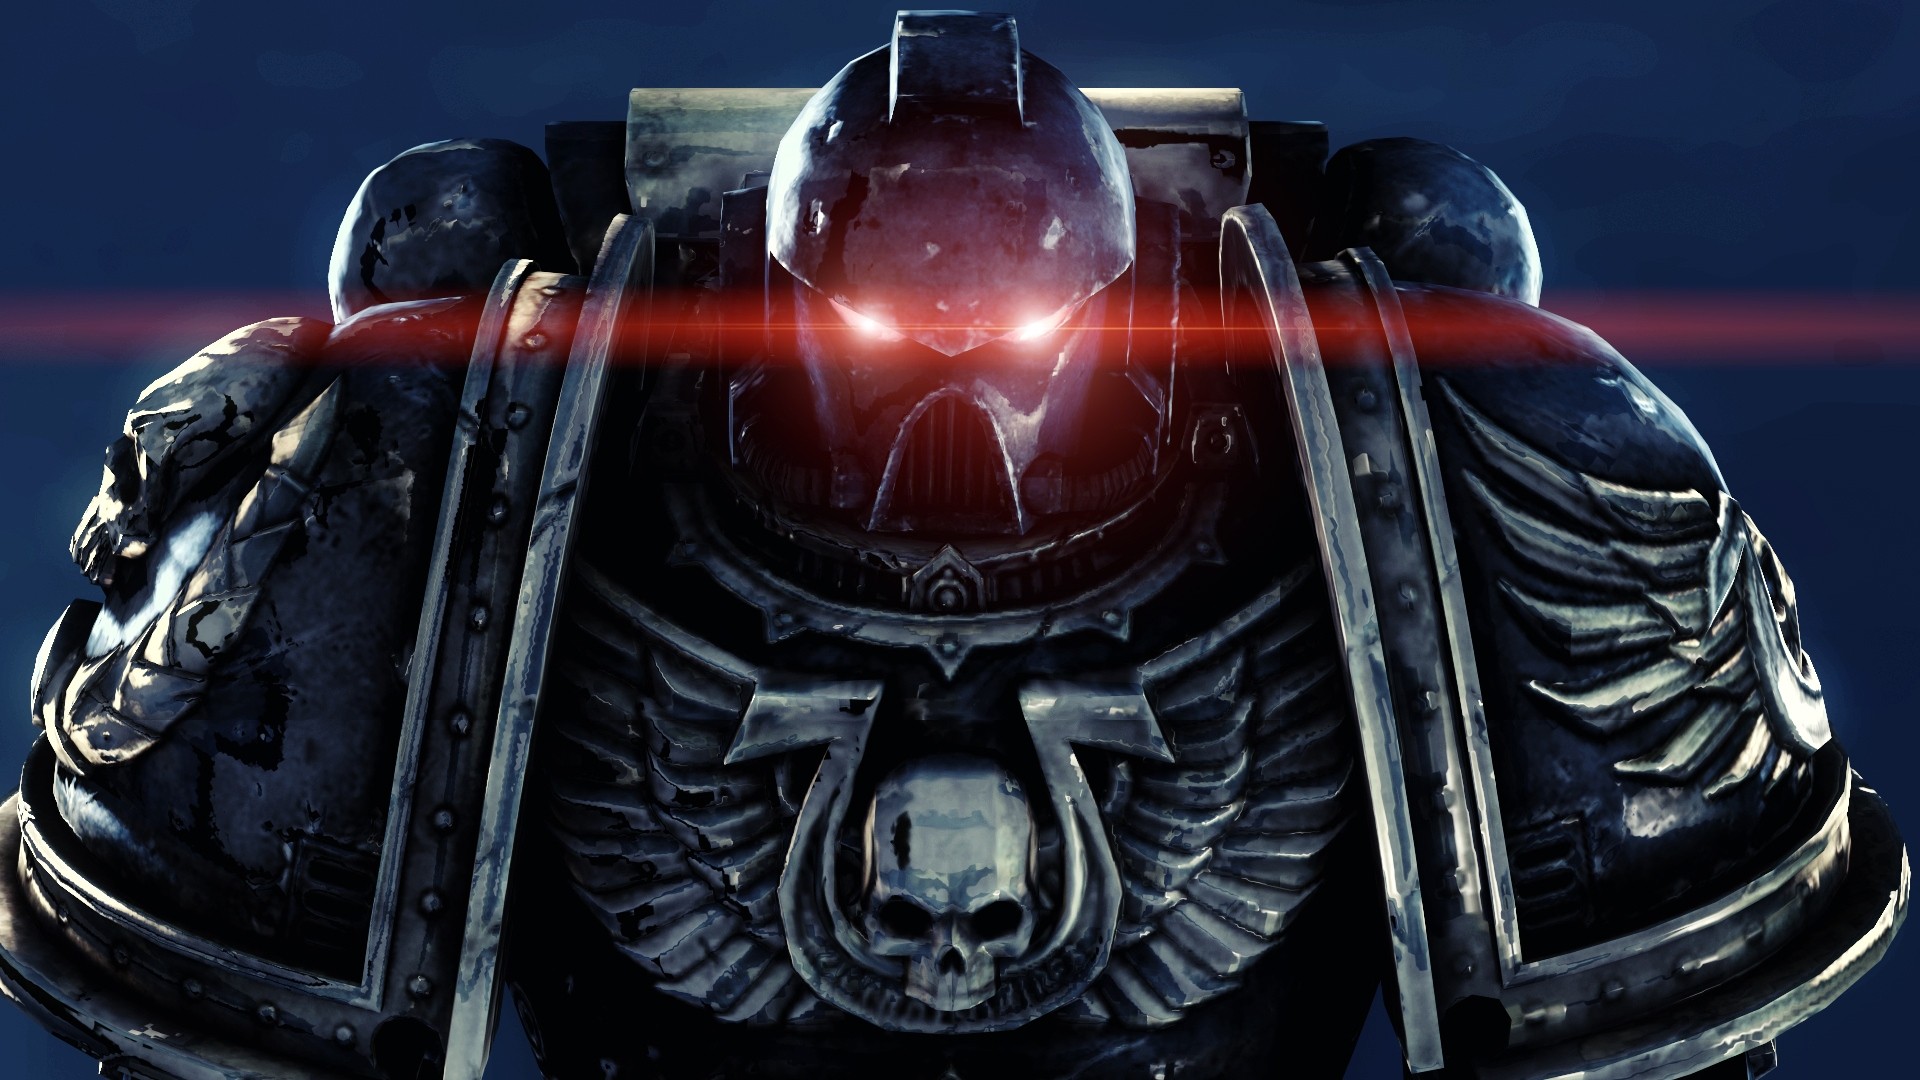 Wallpapers And Other Space Marine Related Art Warhammer 40000 1920x1080